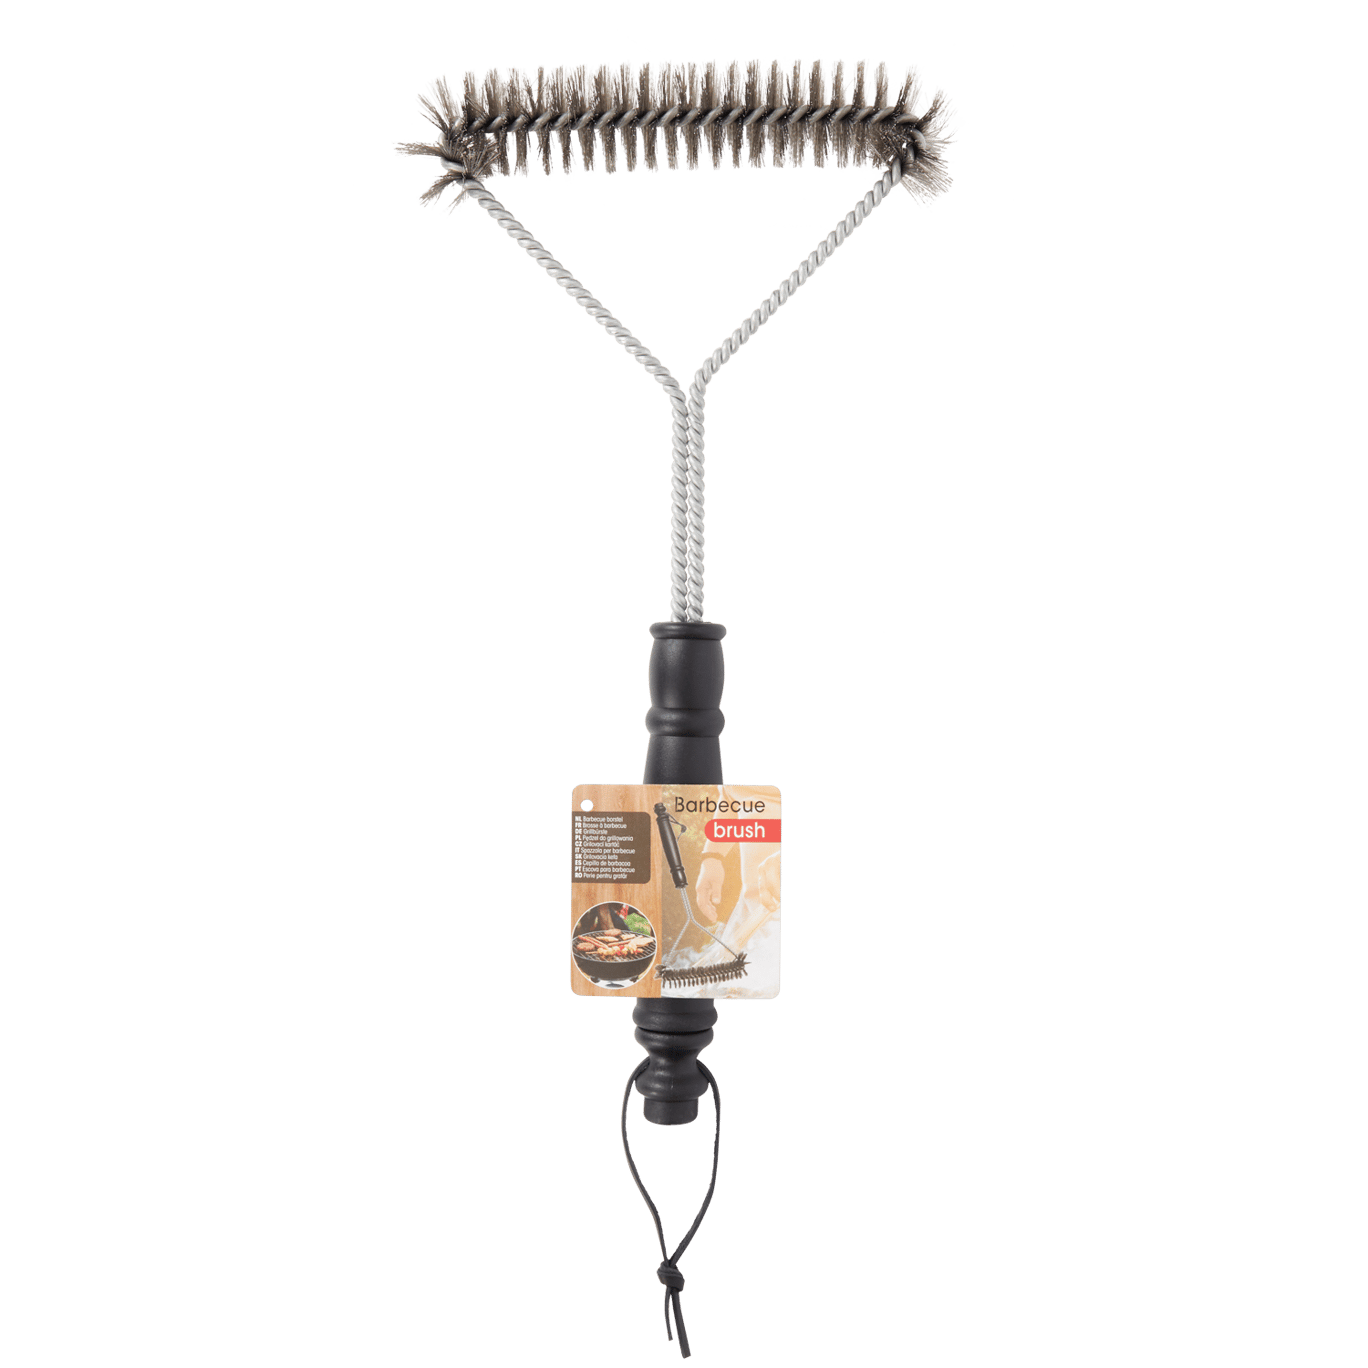 Brosse pour barbecue et grill